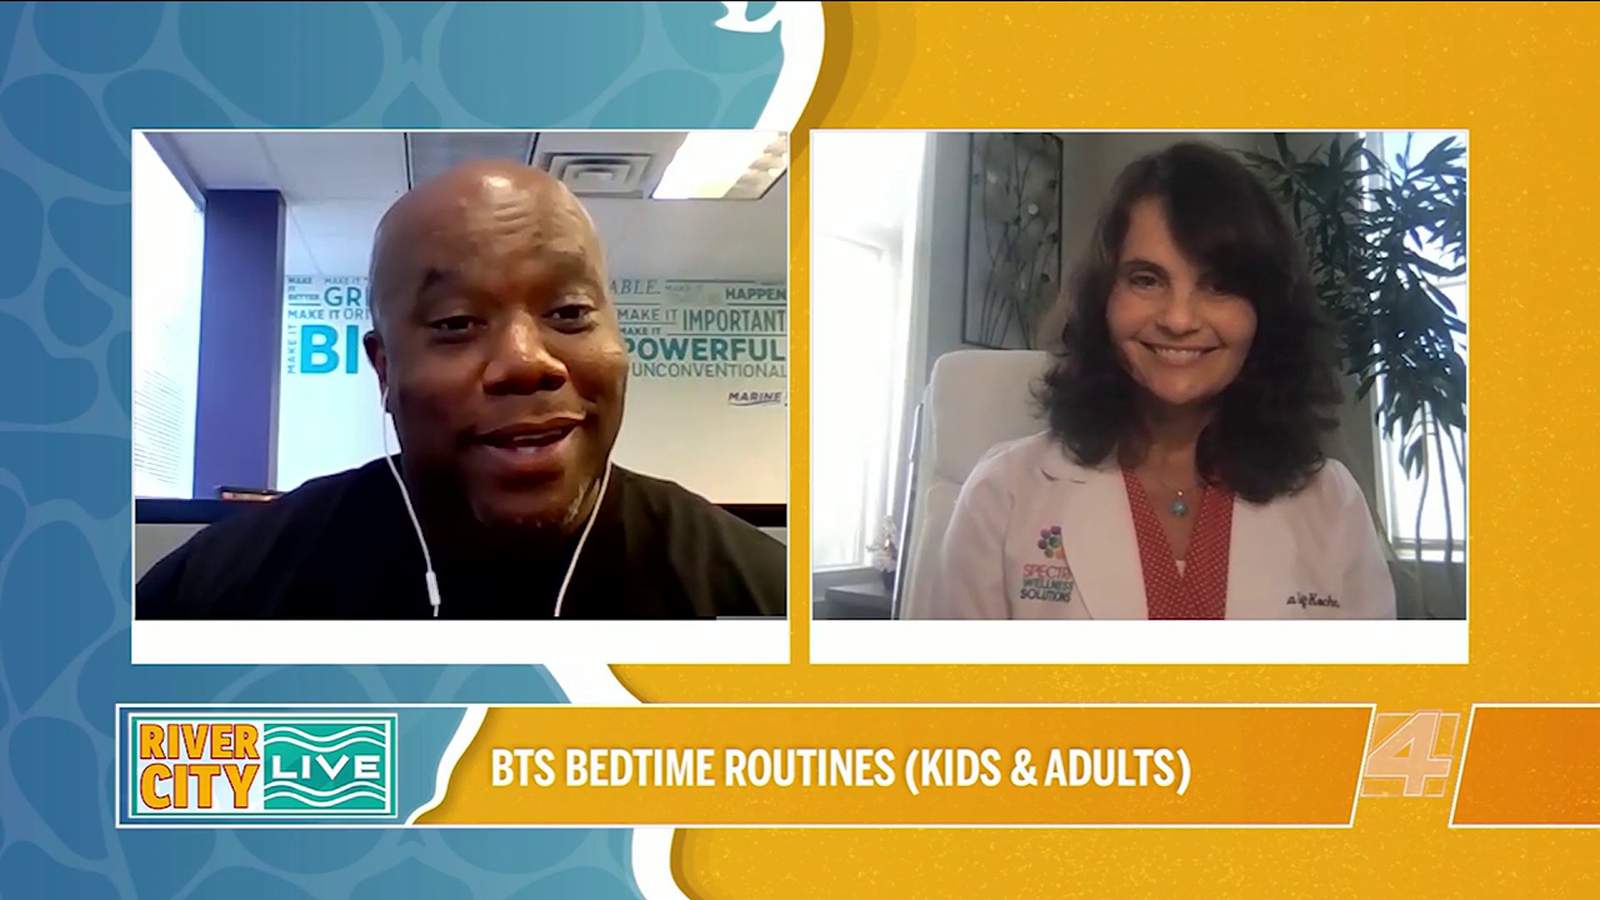 BTS Bedtime Routines for Kids & Adults | River City Live